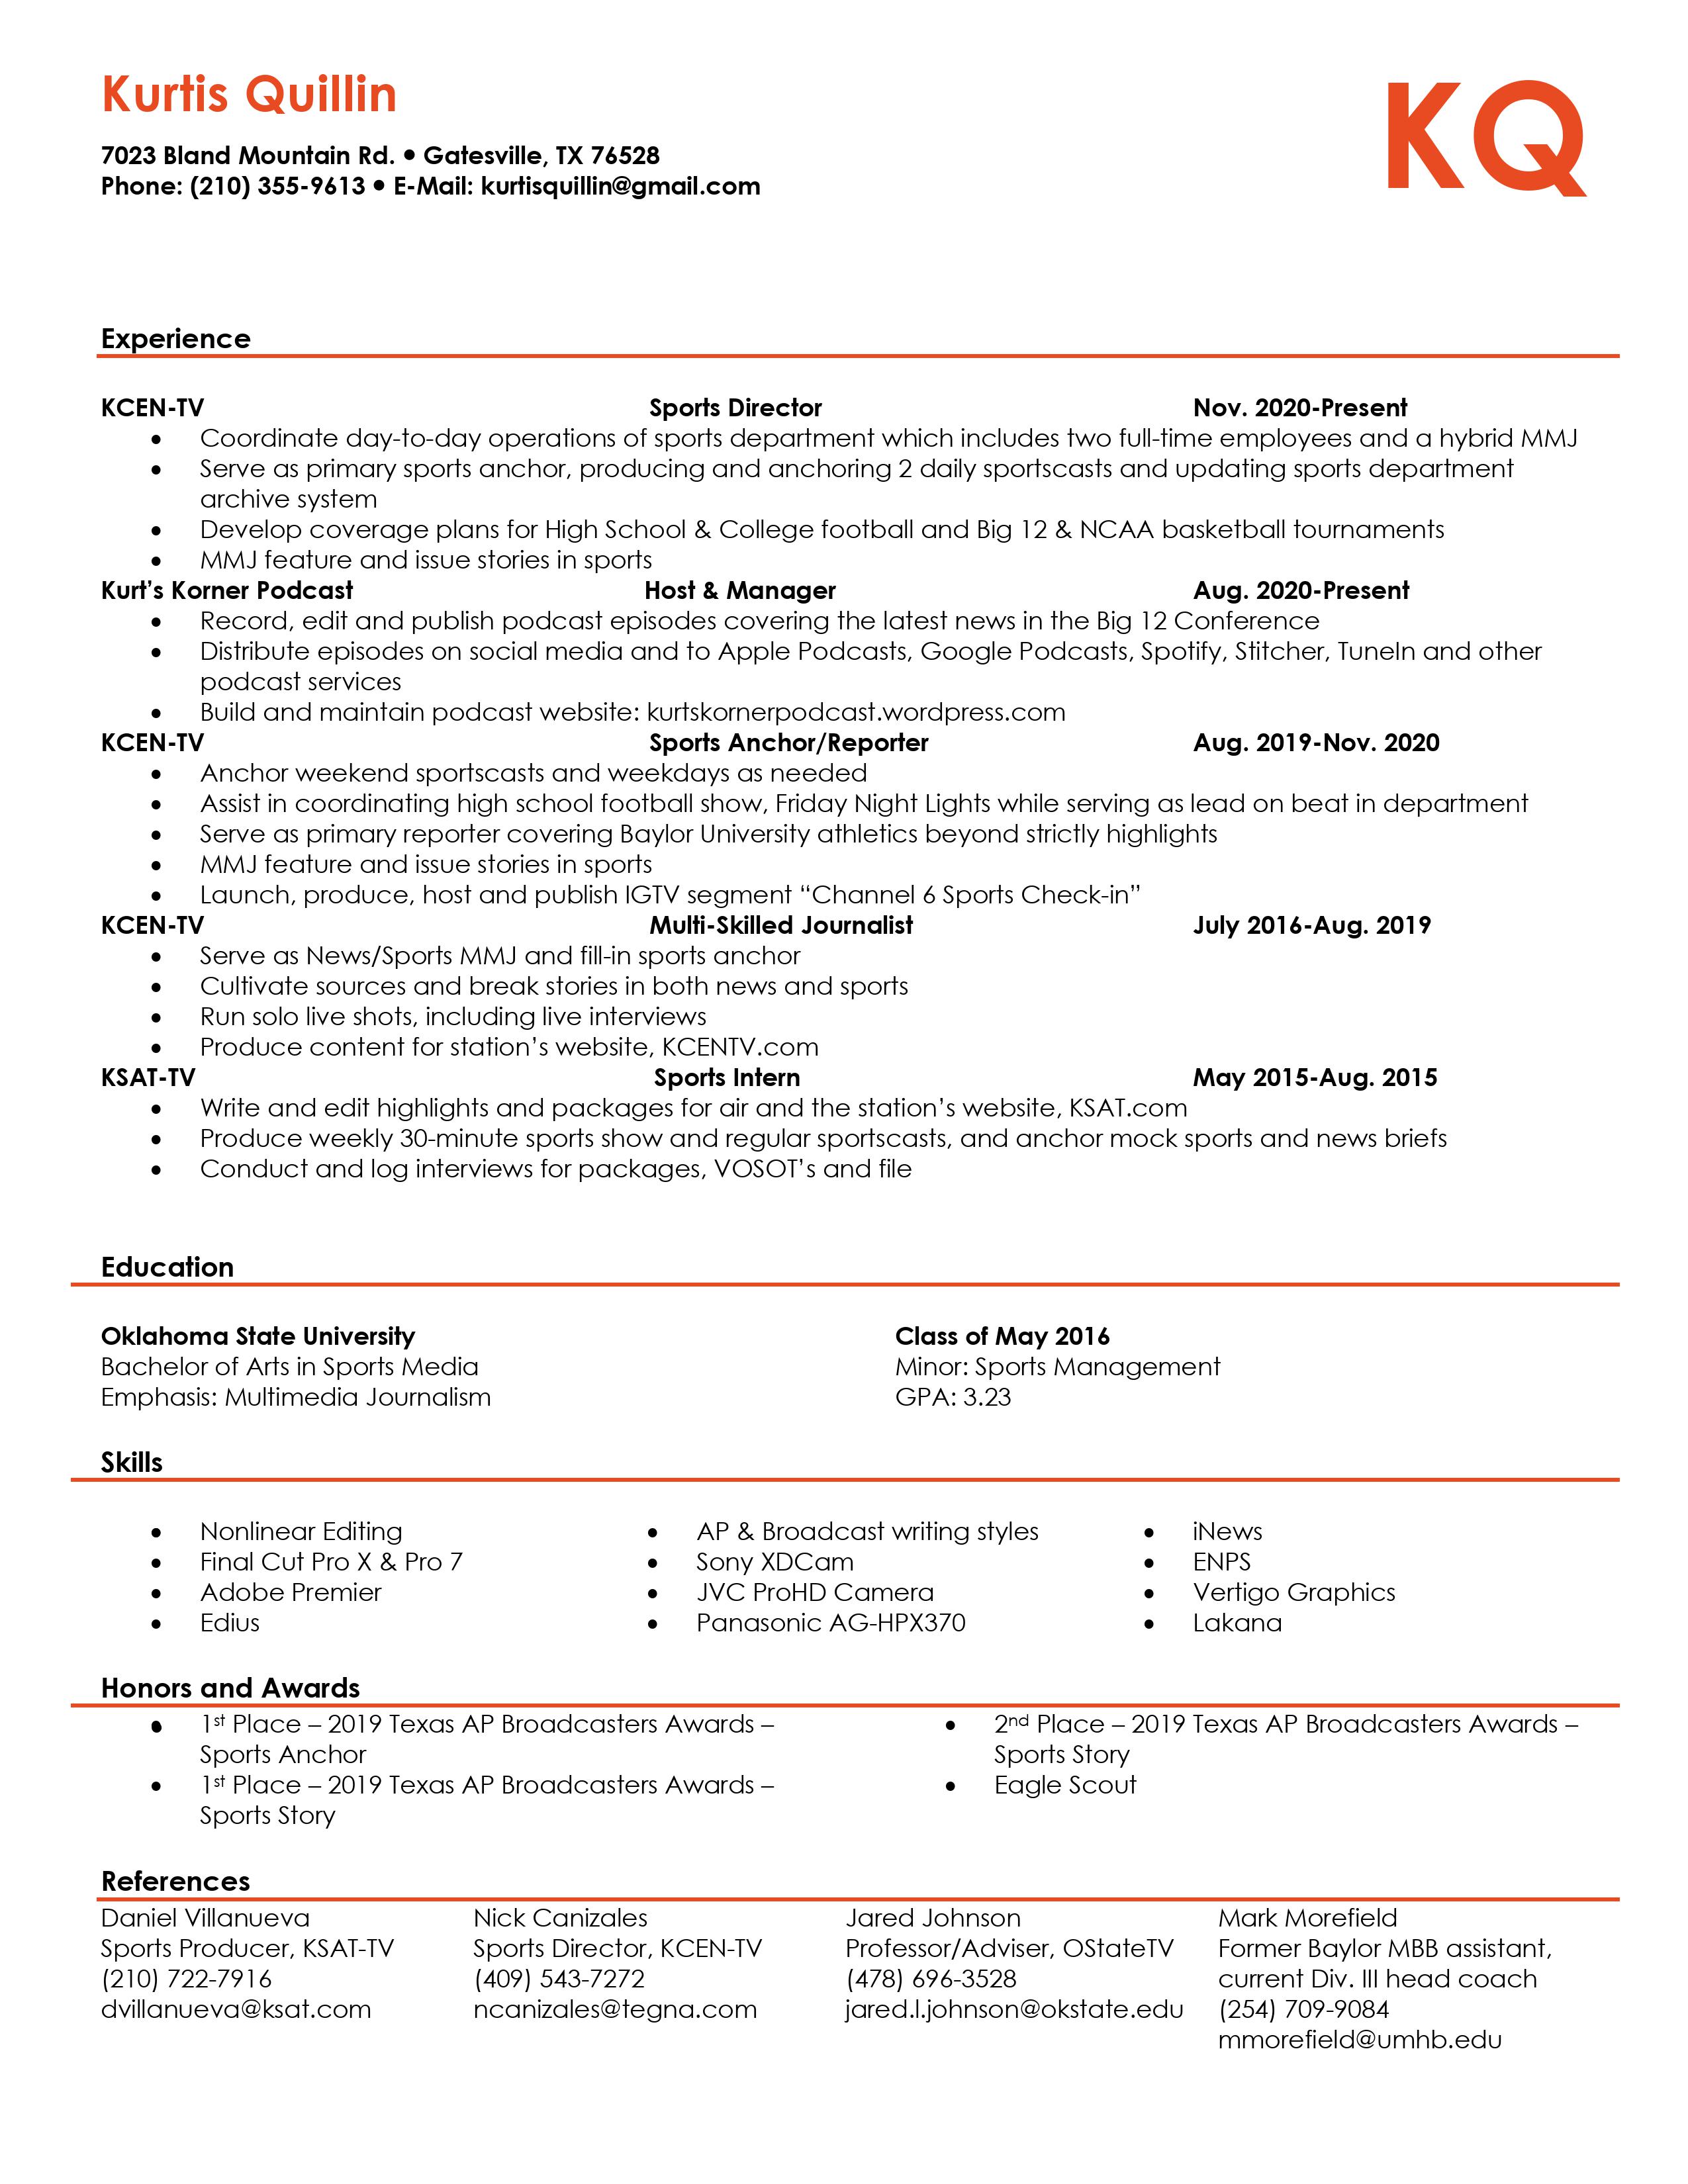 March 2021 resume